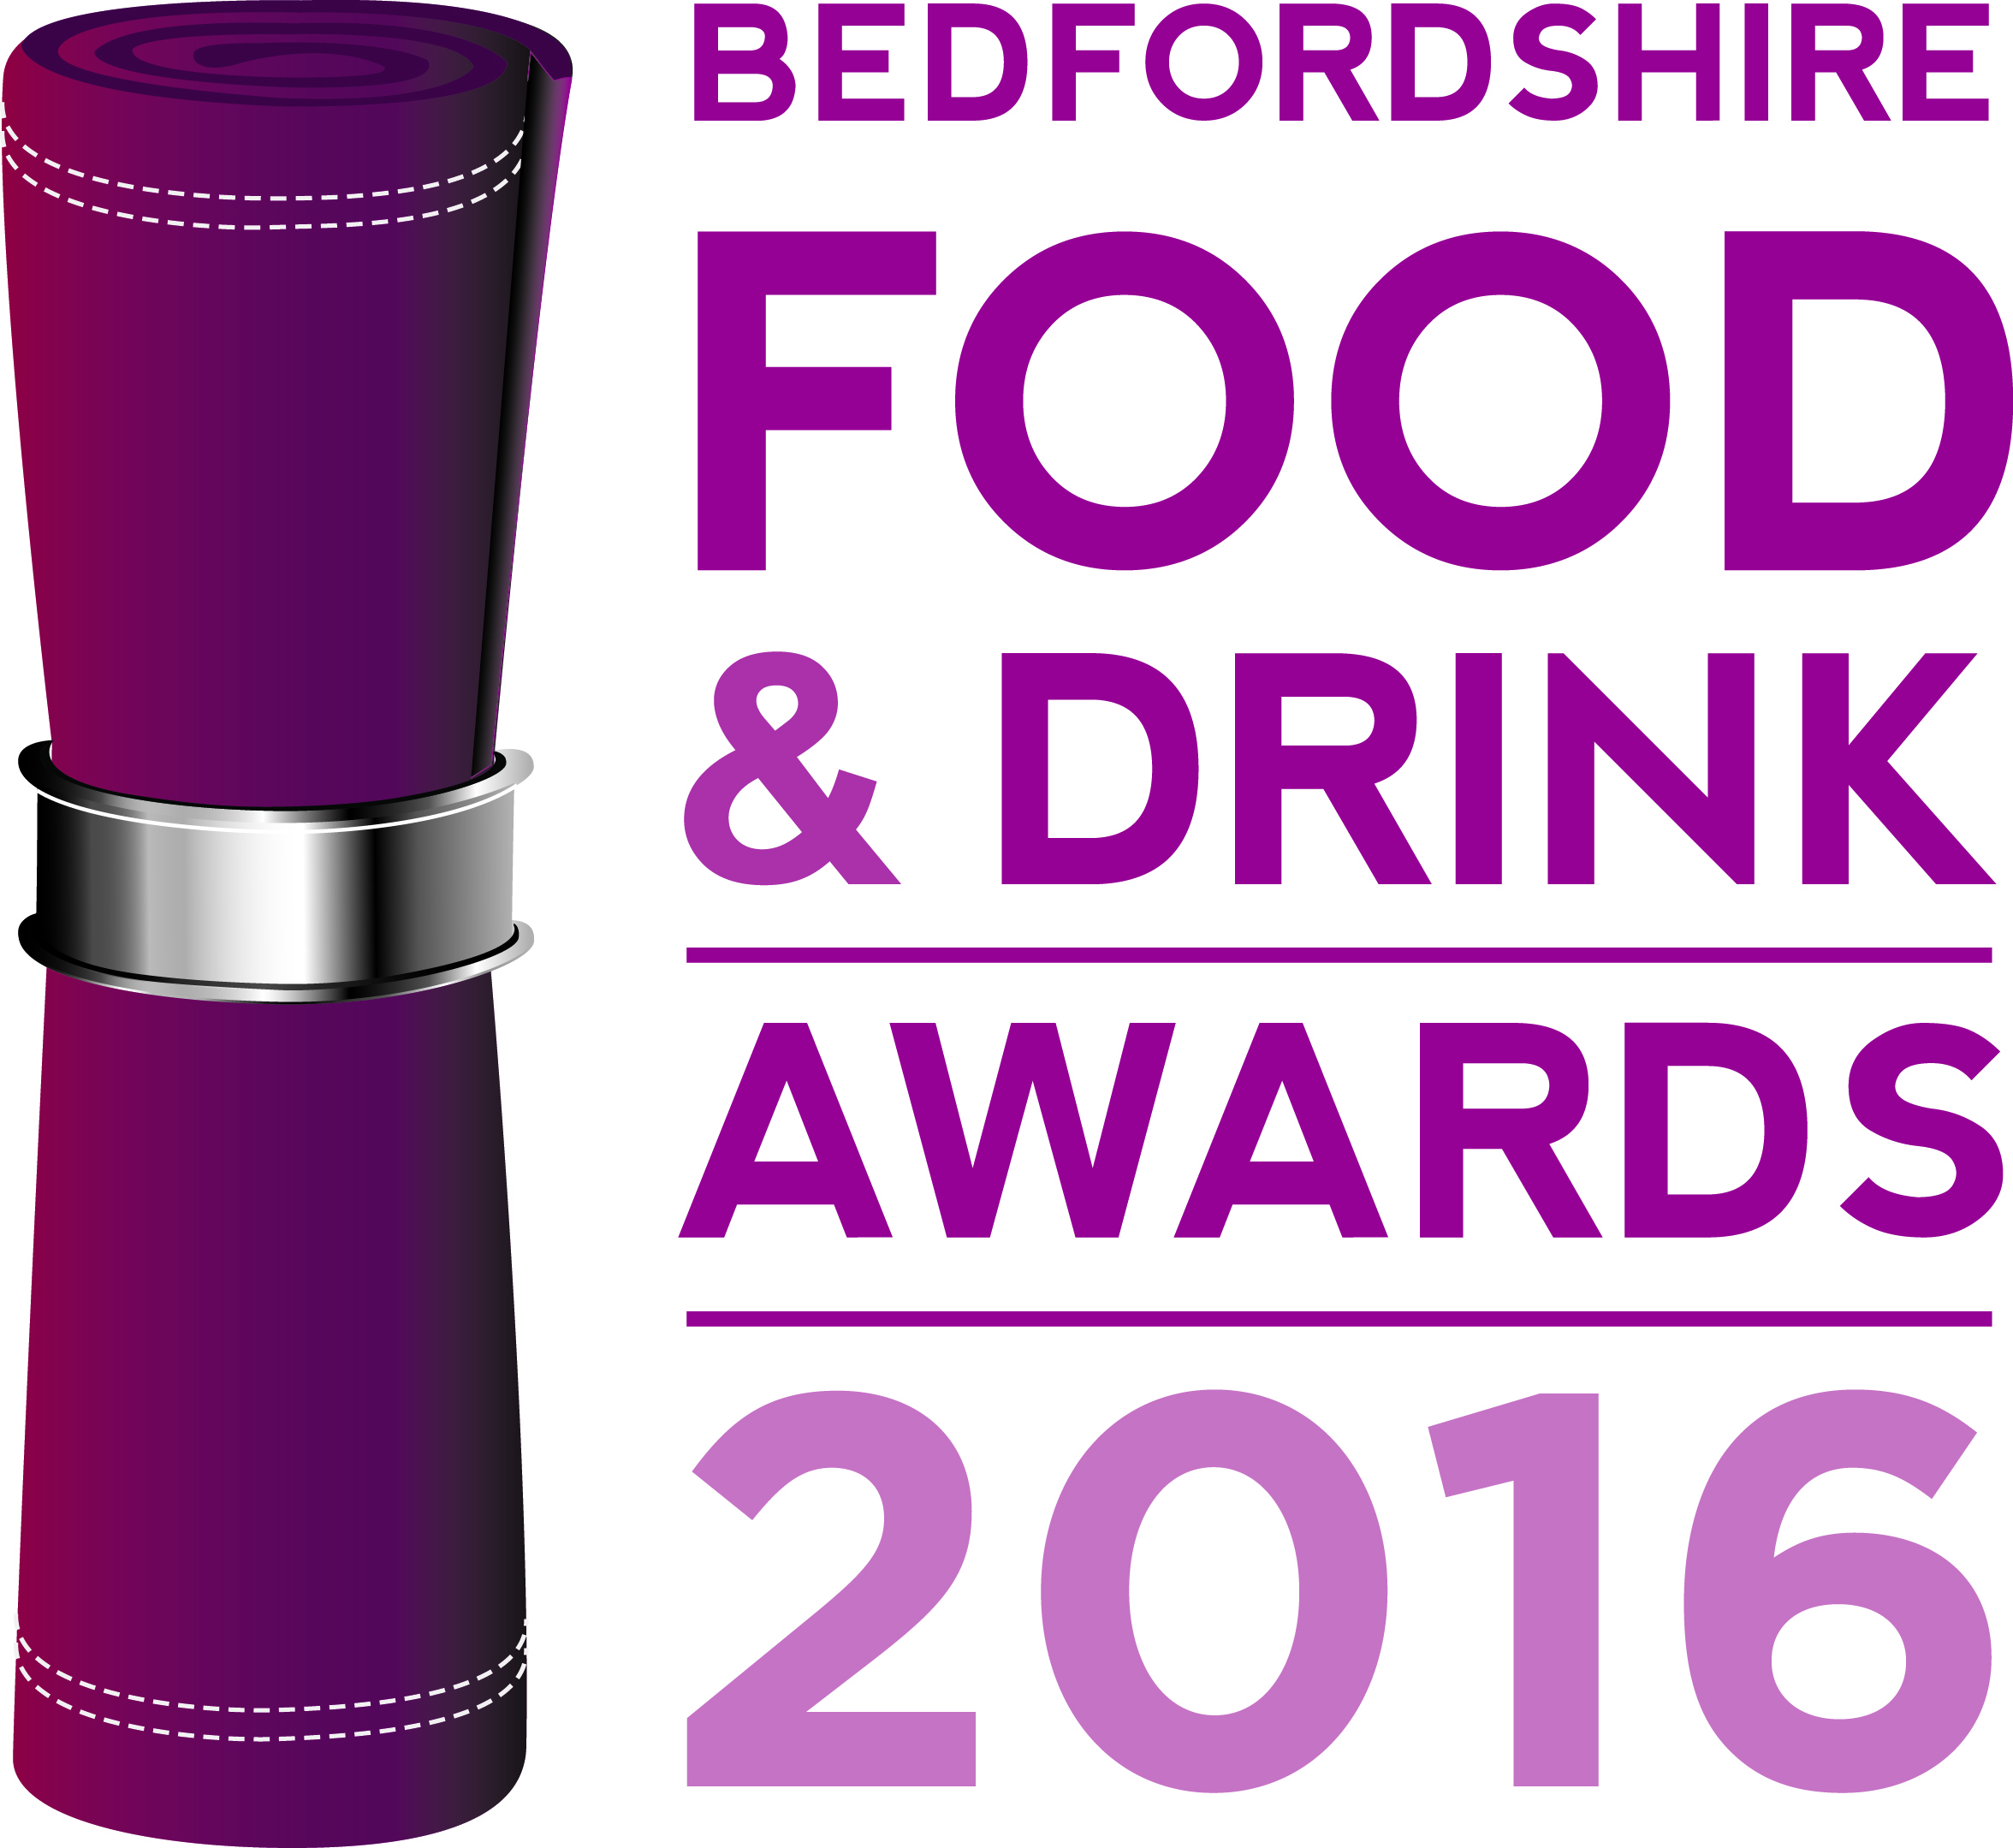 Central Bedfordshire businesses triumph at the Bedfordshire Food & Drink Awards 2016